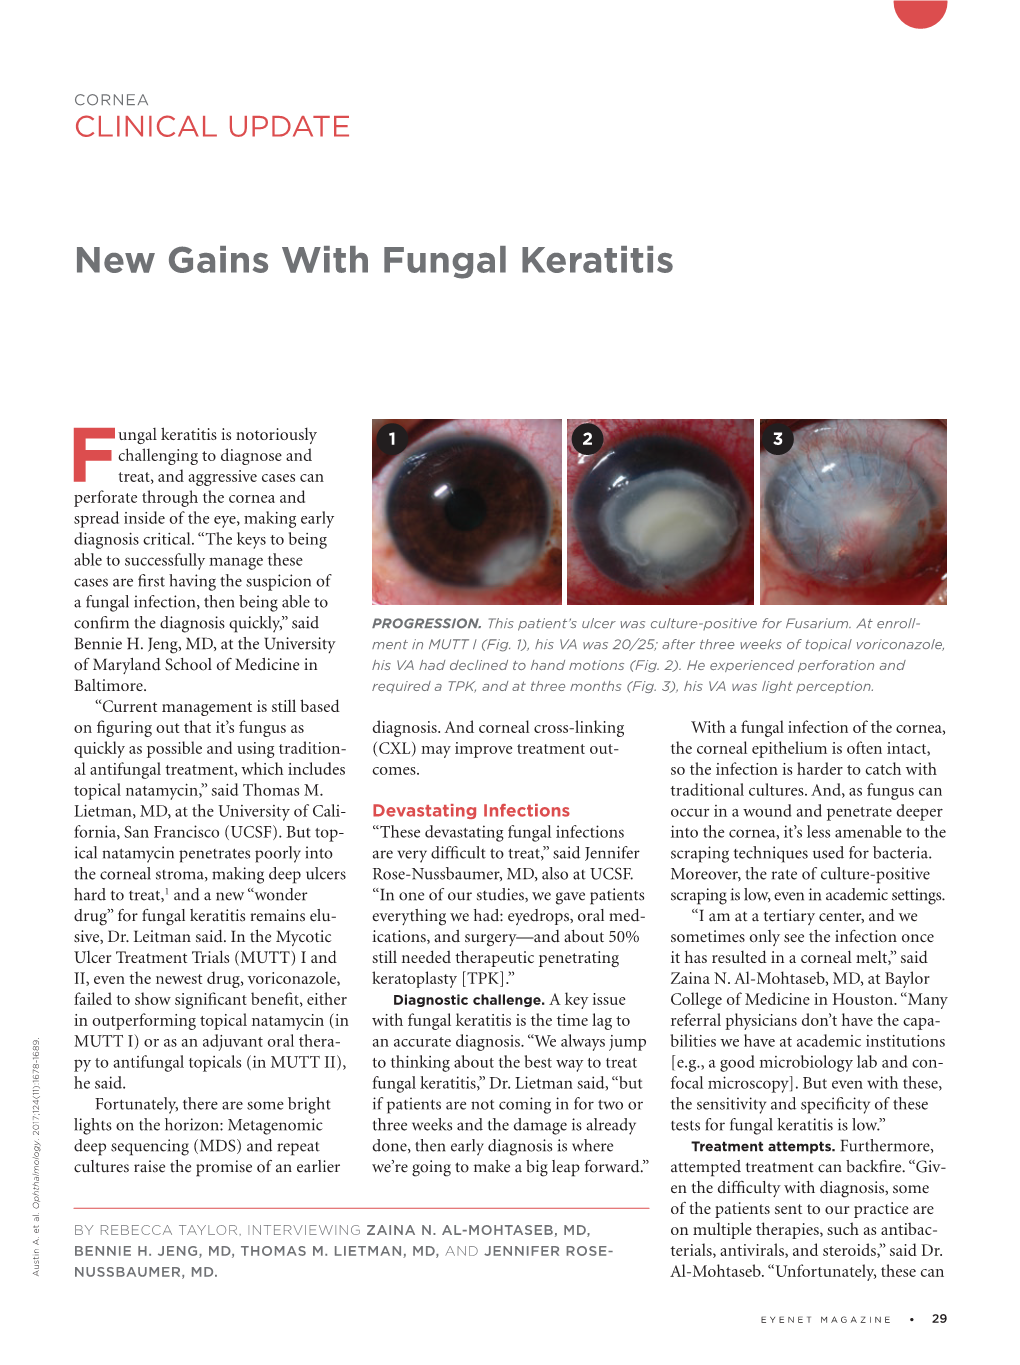 New Gains with Fungal Keratitis